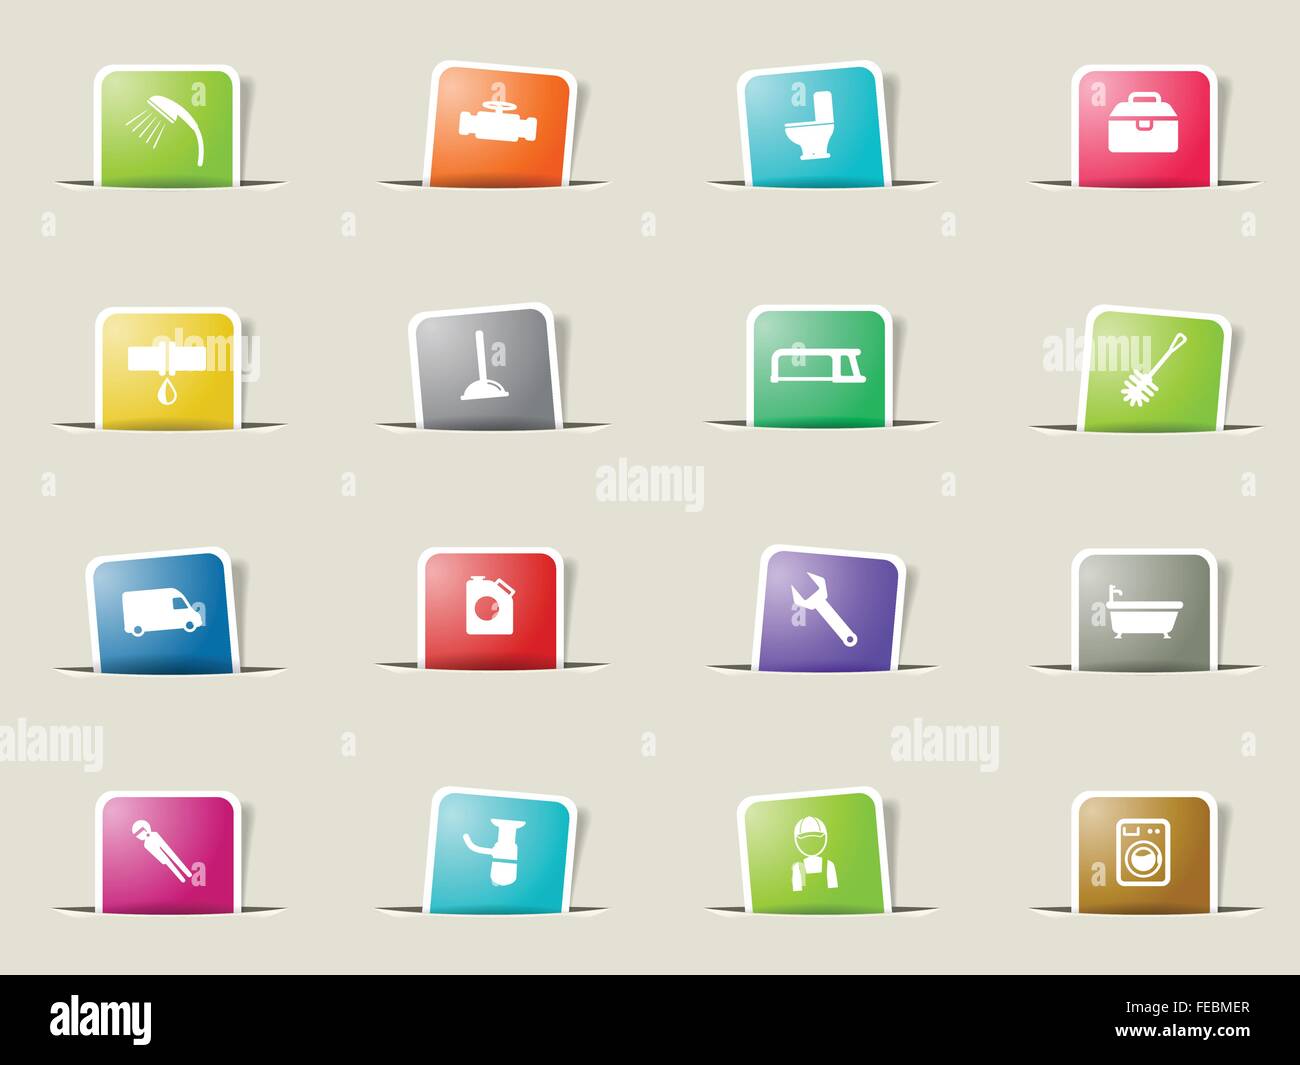 Plumbing service simply icons Stock Vector